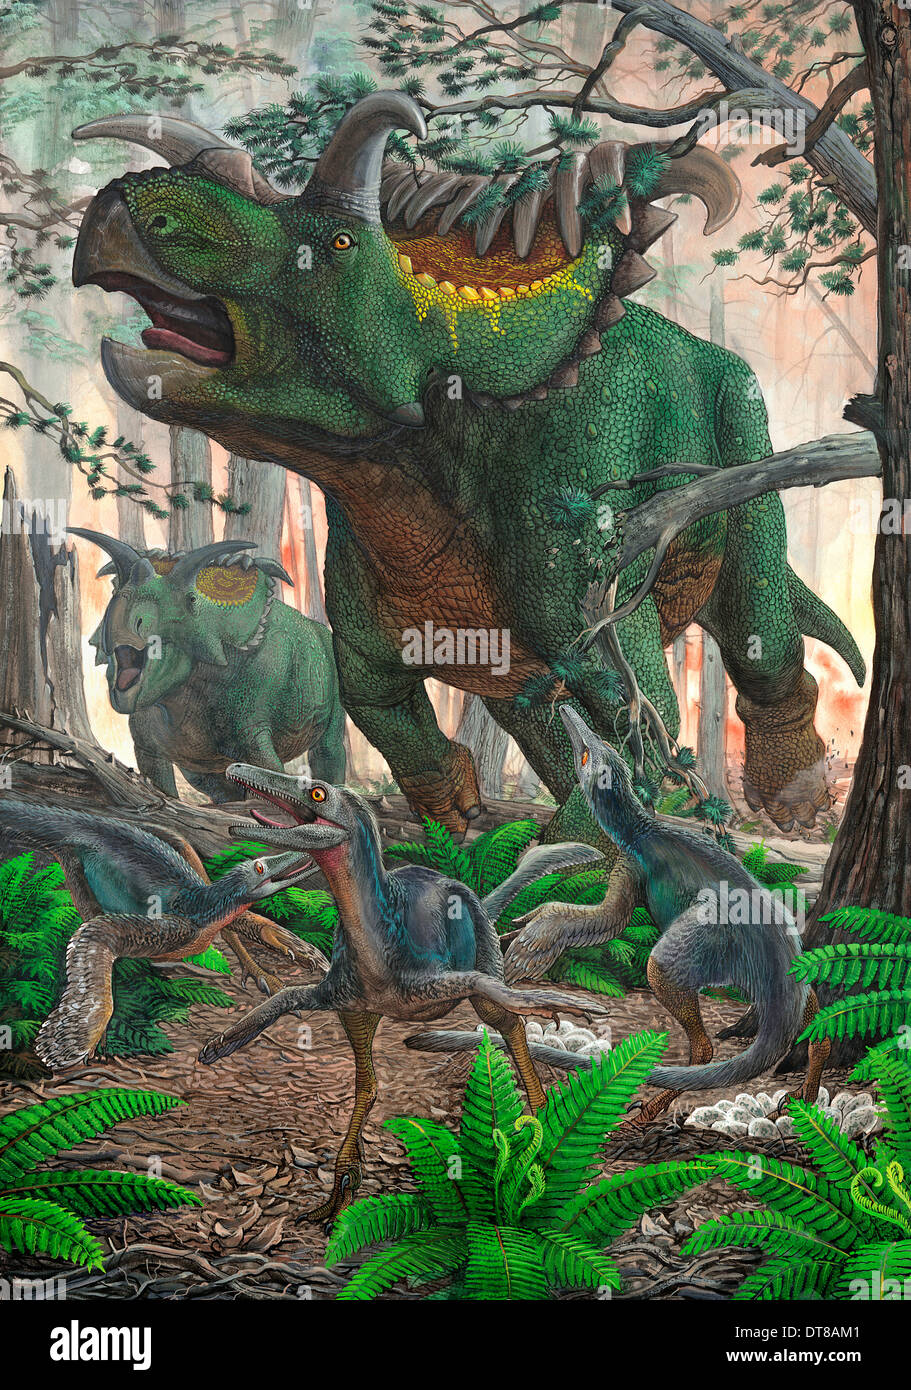 Kosmoceratops tramples over nesting Talos dinosaurs while fleeing from a forest fire. Stock Photo